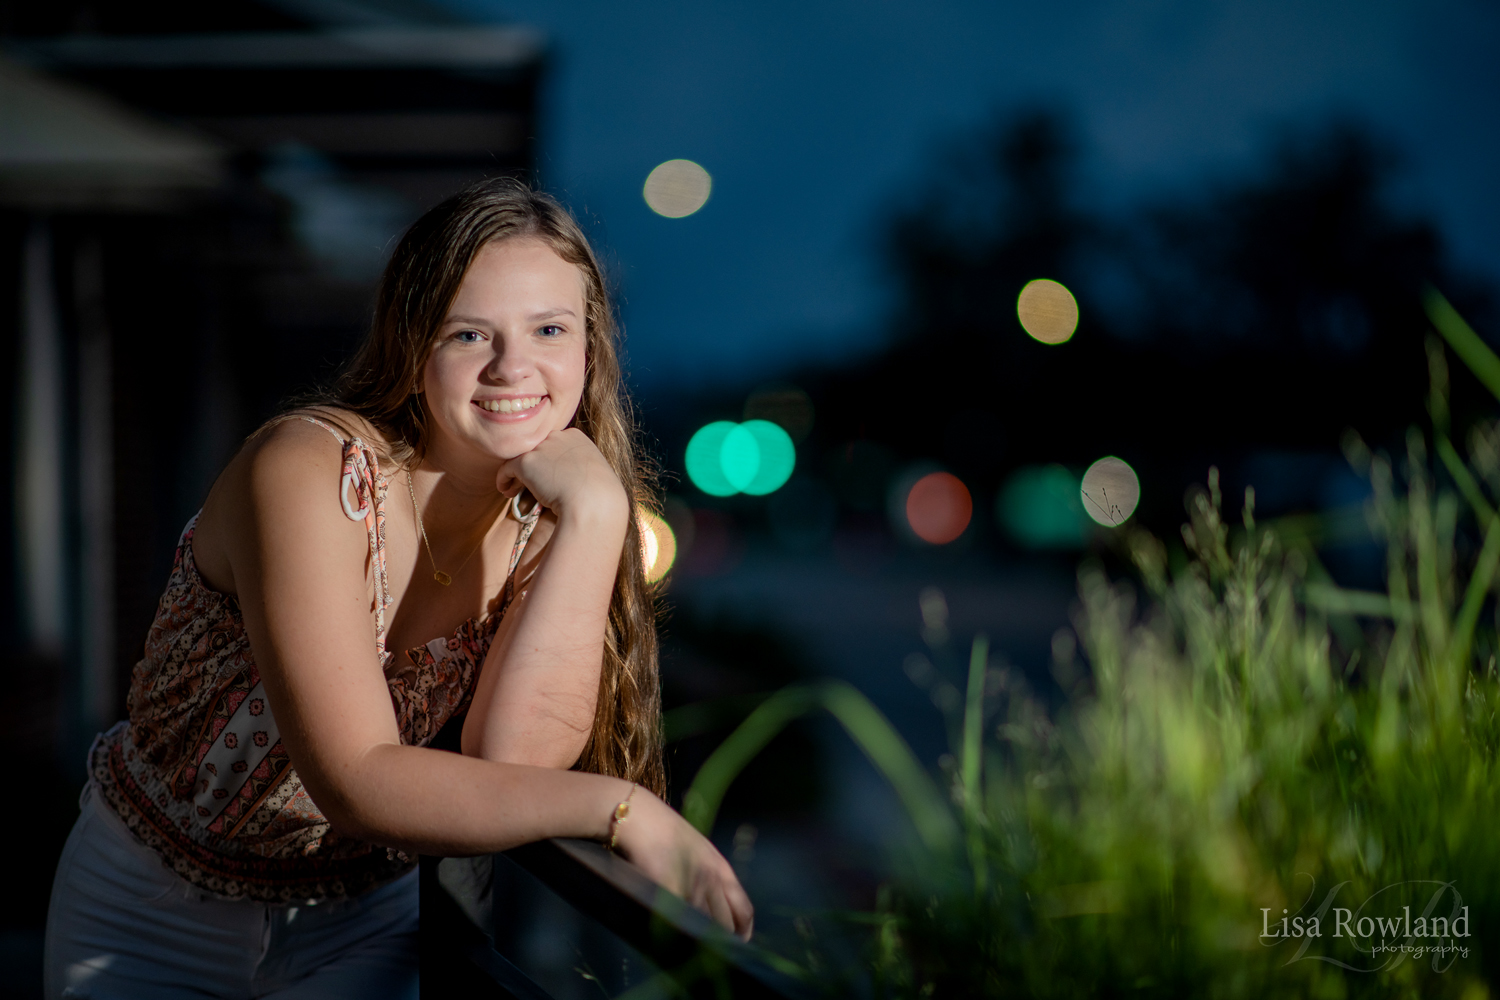 Senior photography by Lisa Rowland at Perfect-Photos in Trenton FL